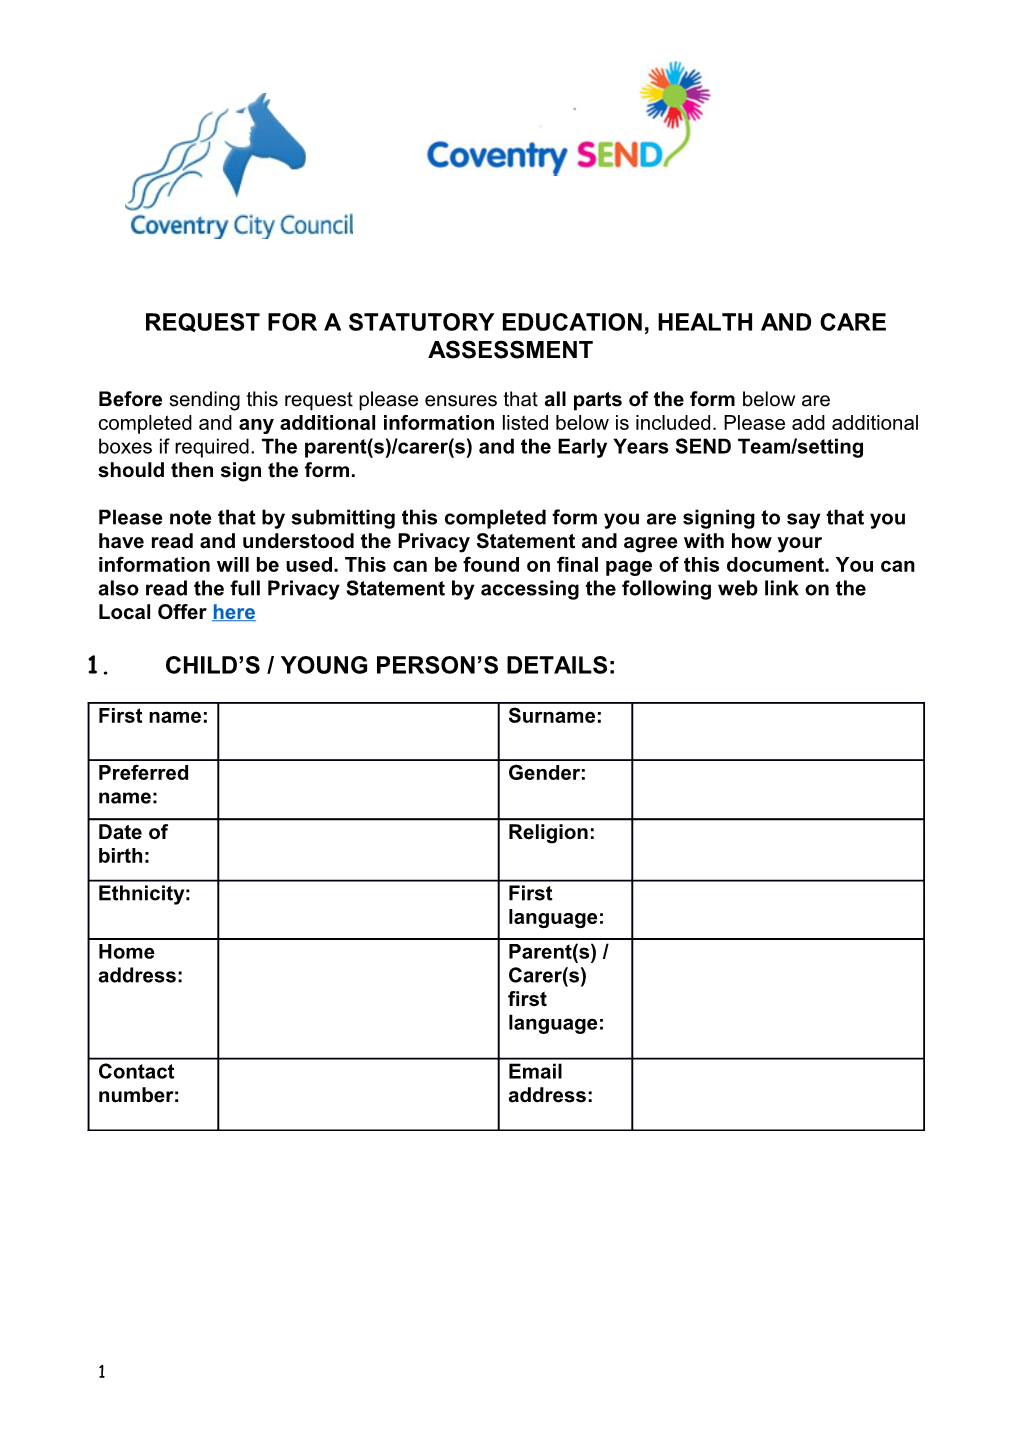 Request for a Statutory Education, Health and Care Assessment